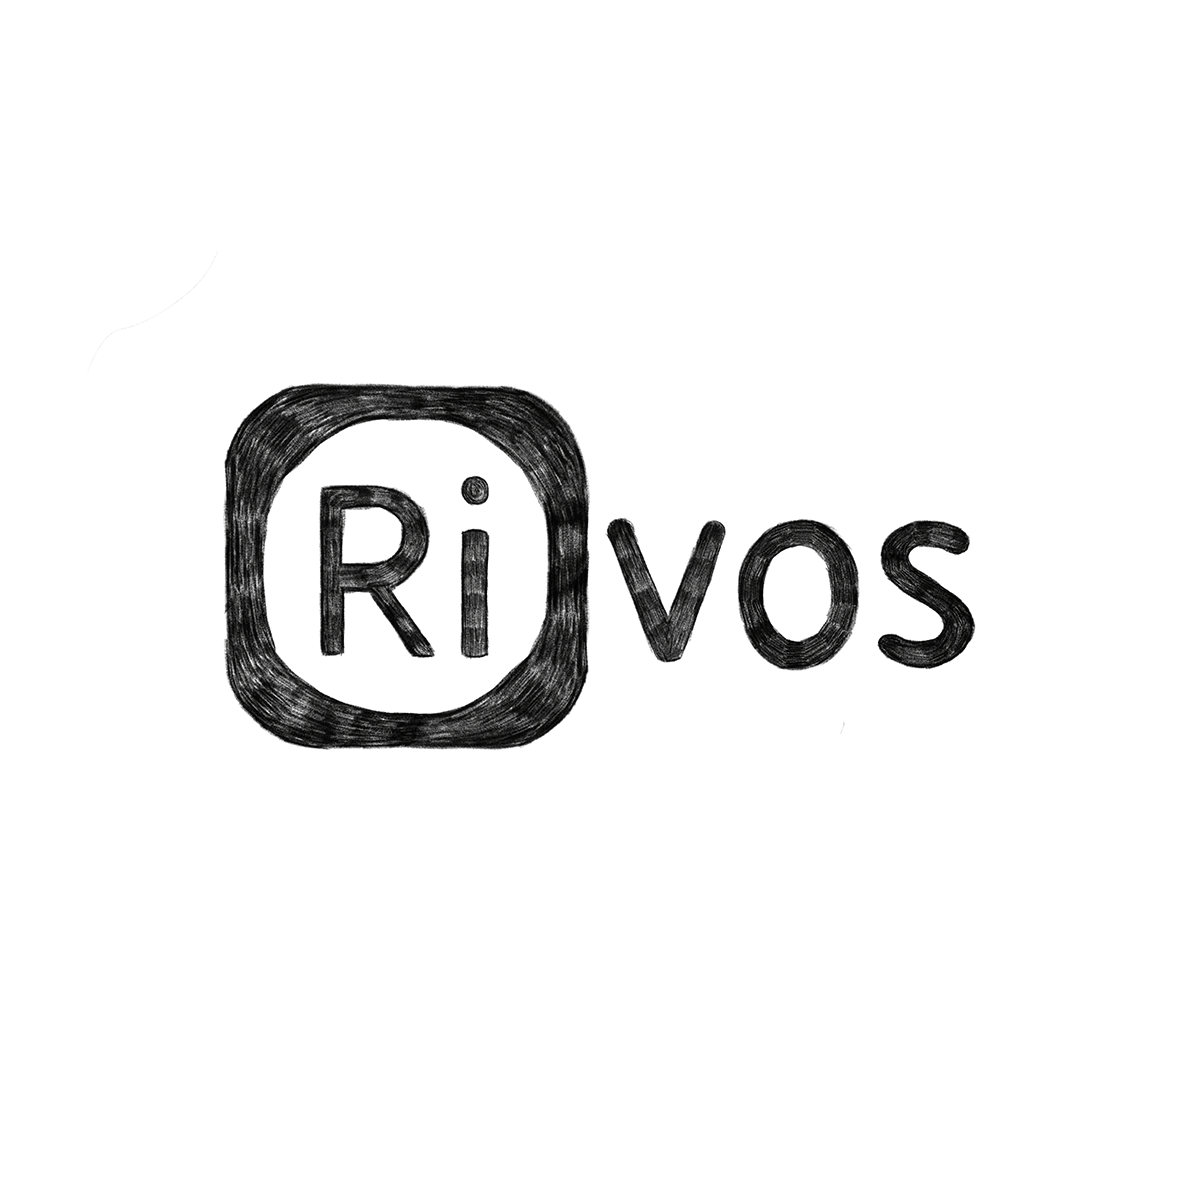 Rivos aims to build industry-leading power efficient, high performance, secure server solutions based on RISC-V, using workload-defined hardware.